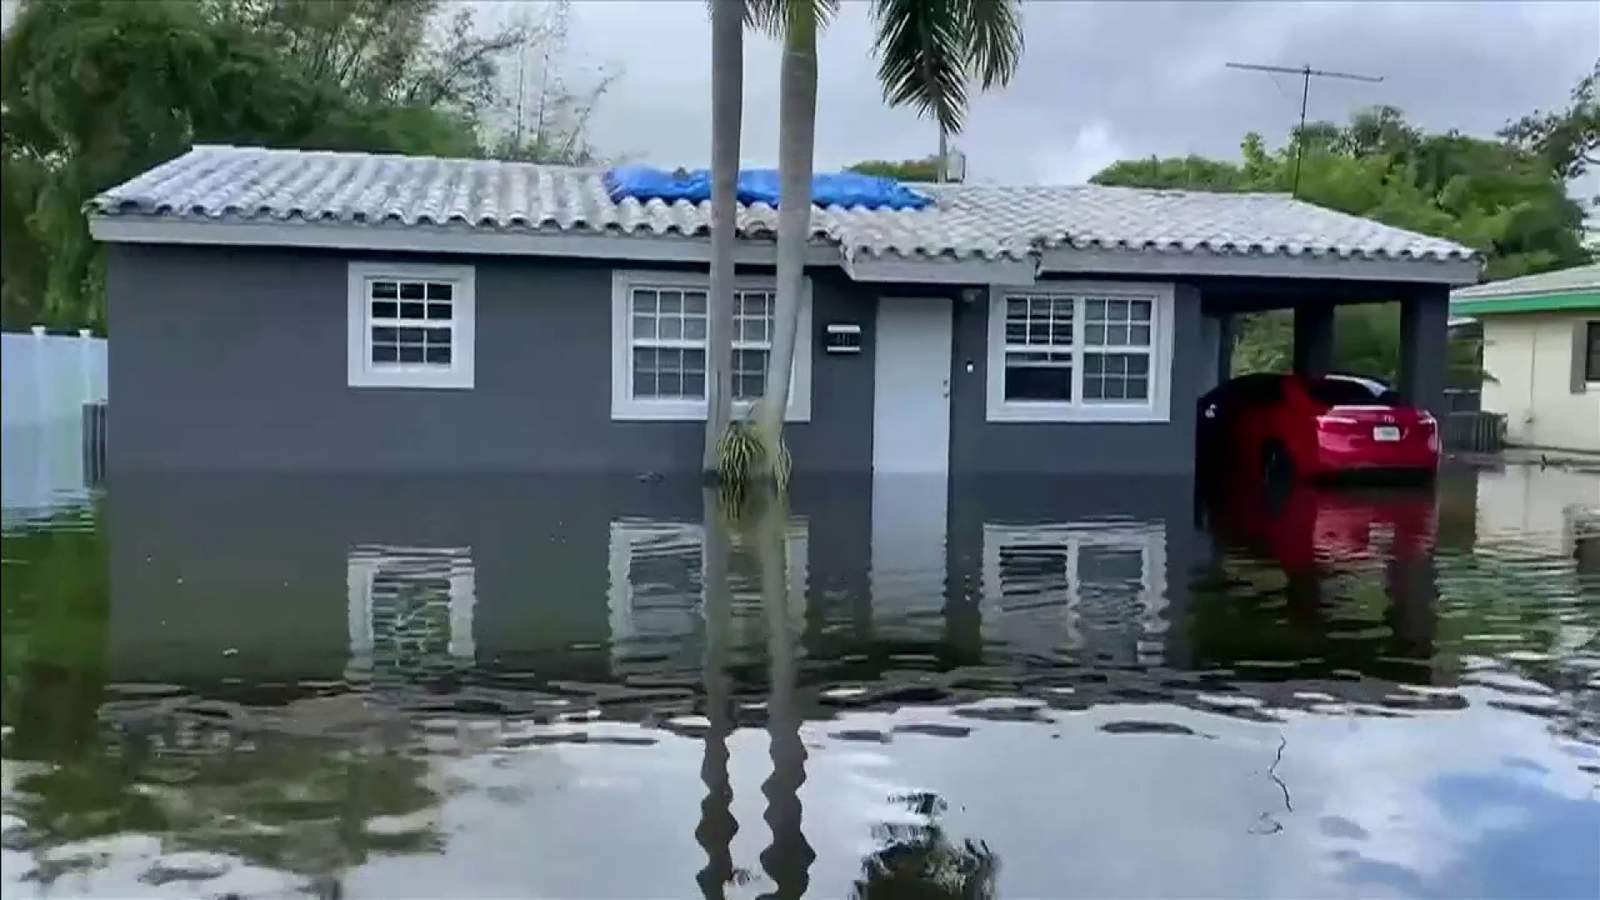 Flooding continues a day after Eta for some parts of Broward County